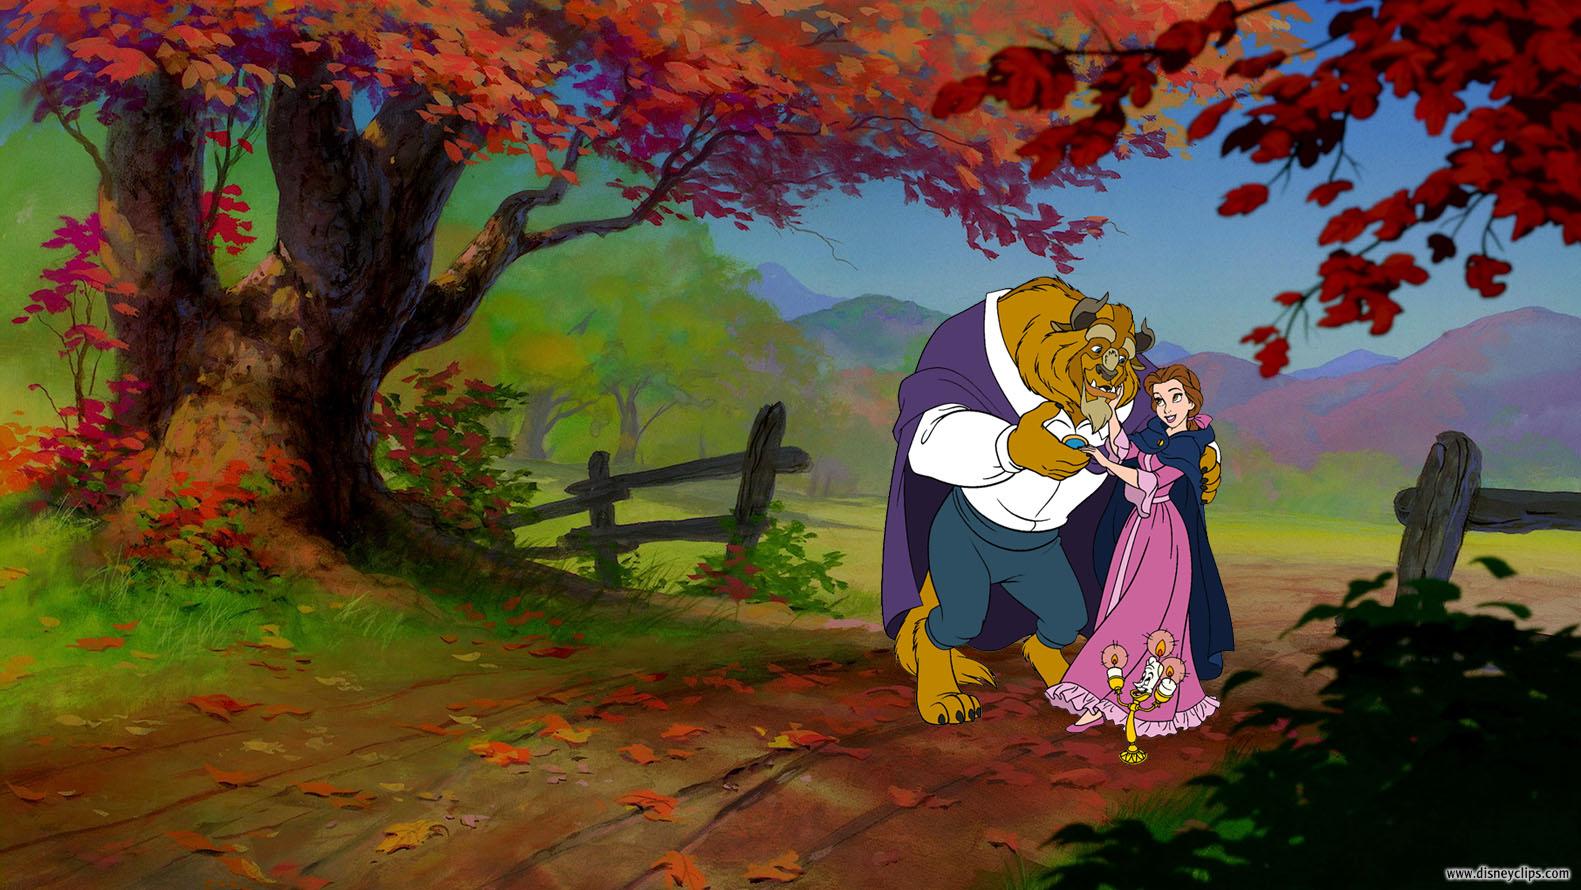 Beauty and the Beast Wallpaper. Disney's World of Wonders